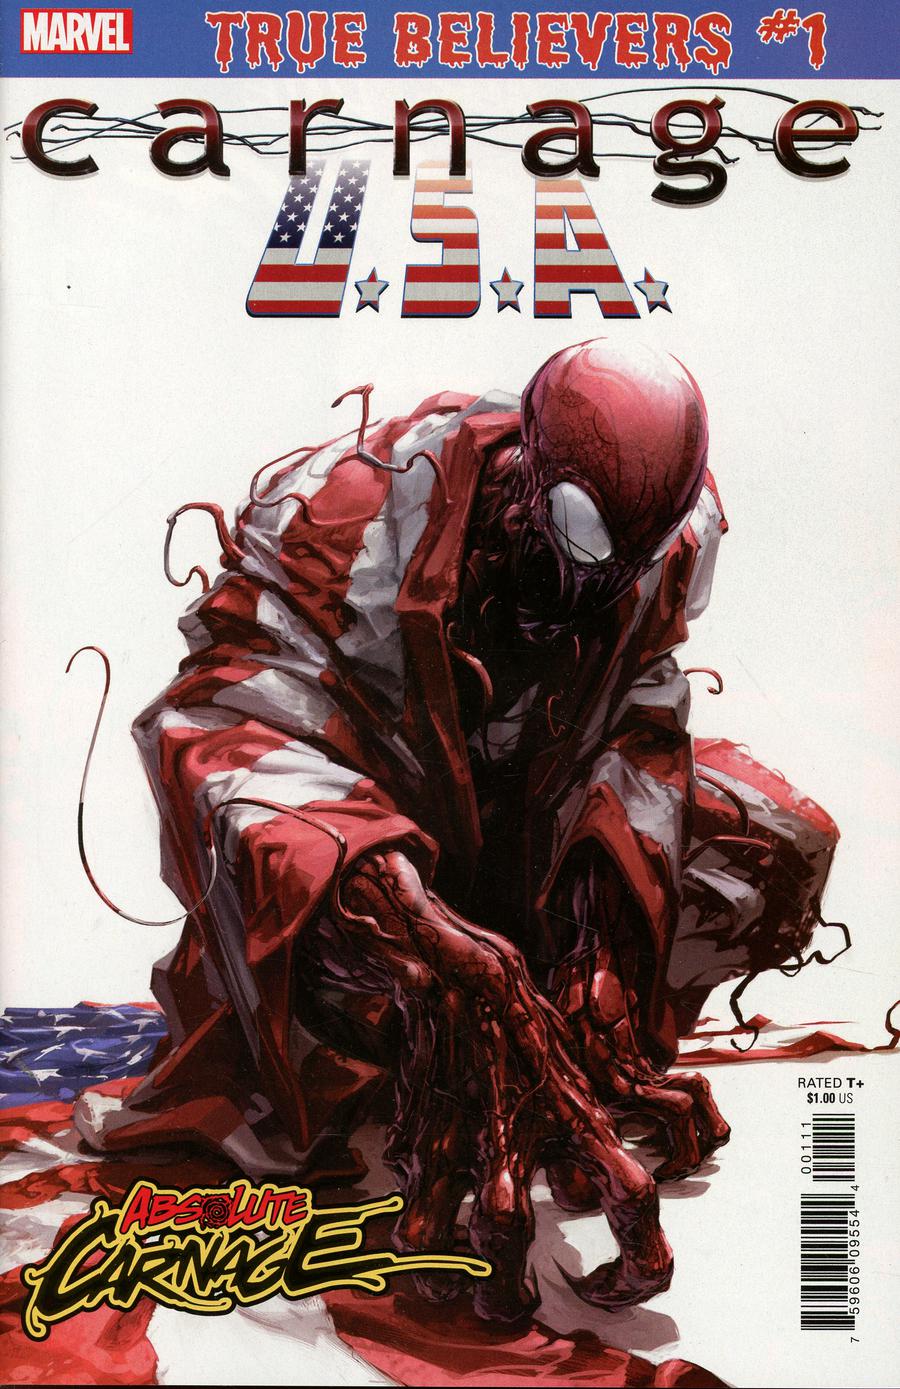 True Believers Absolute Carnage Carnage USA #1